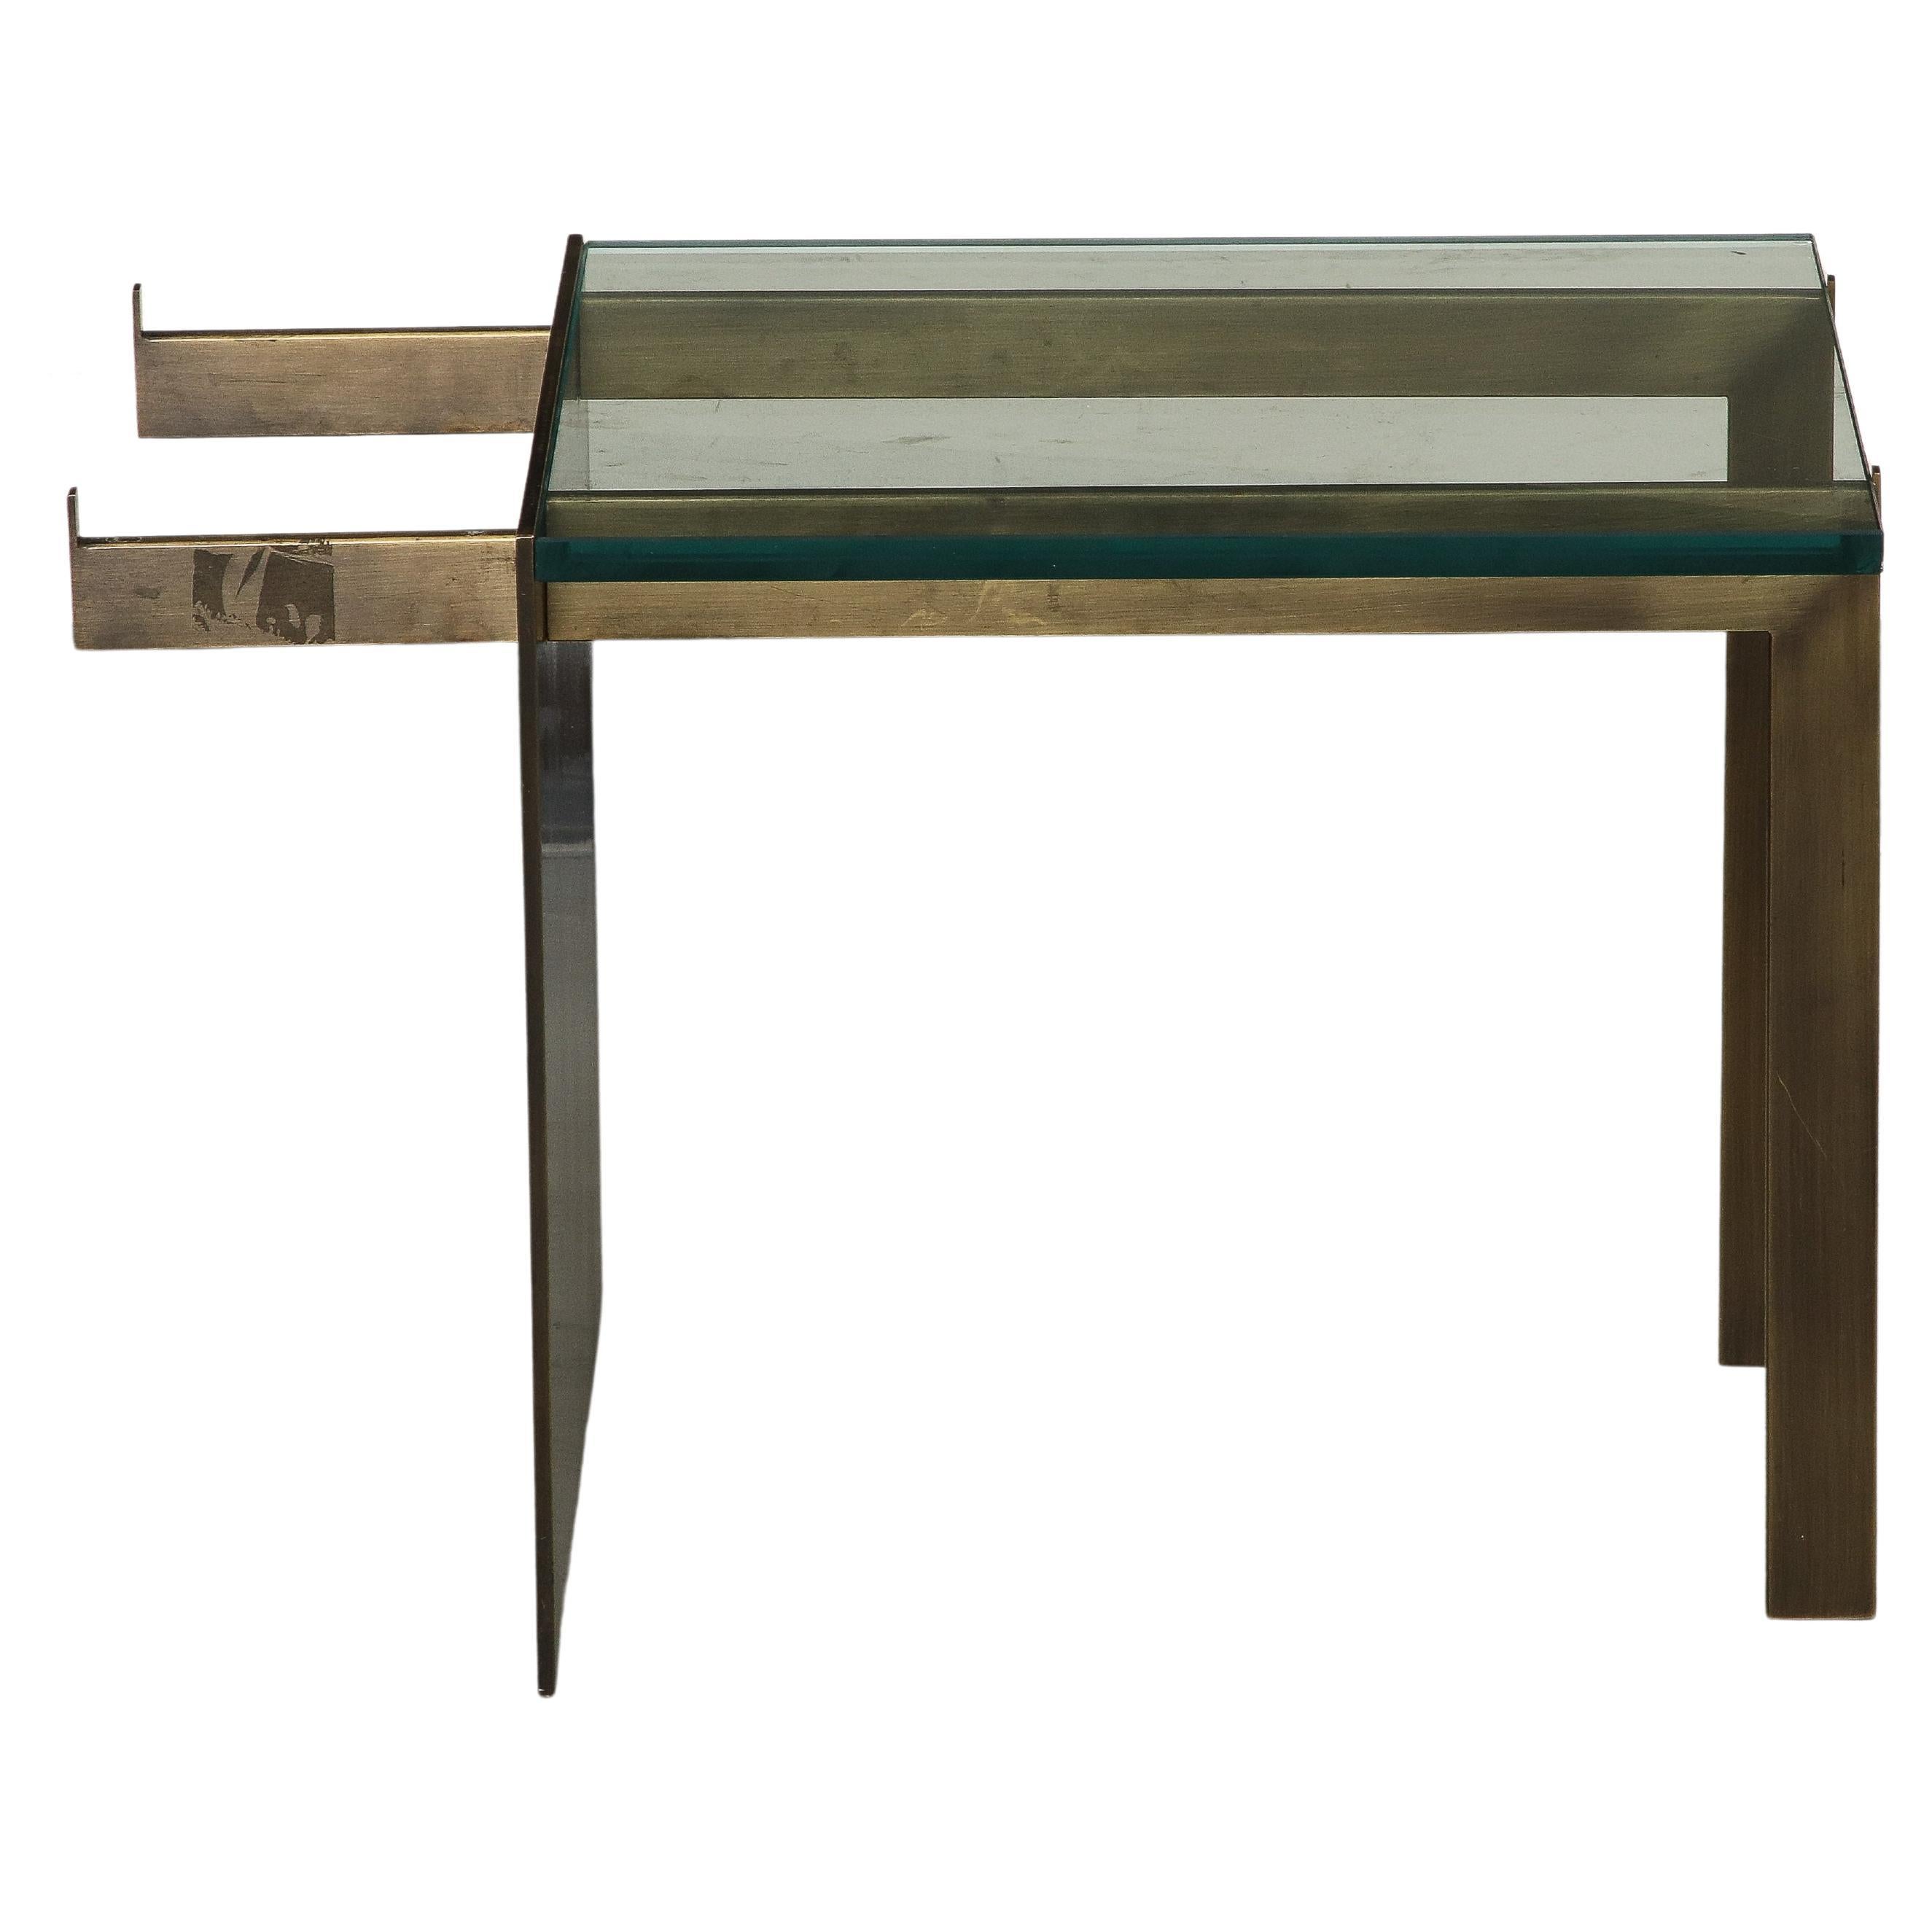 Modernist sculptural bronze and glass coffee table. One side features a flat sheet of bronze in counterpoint to the support and legs opposite. A glass piece could be added to the small section on the other side of the bronze sheet if desired. 